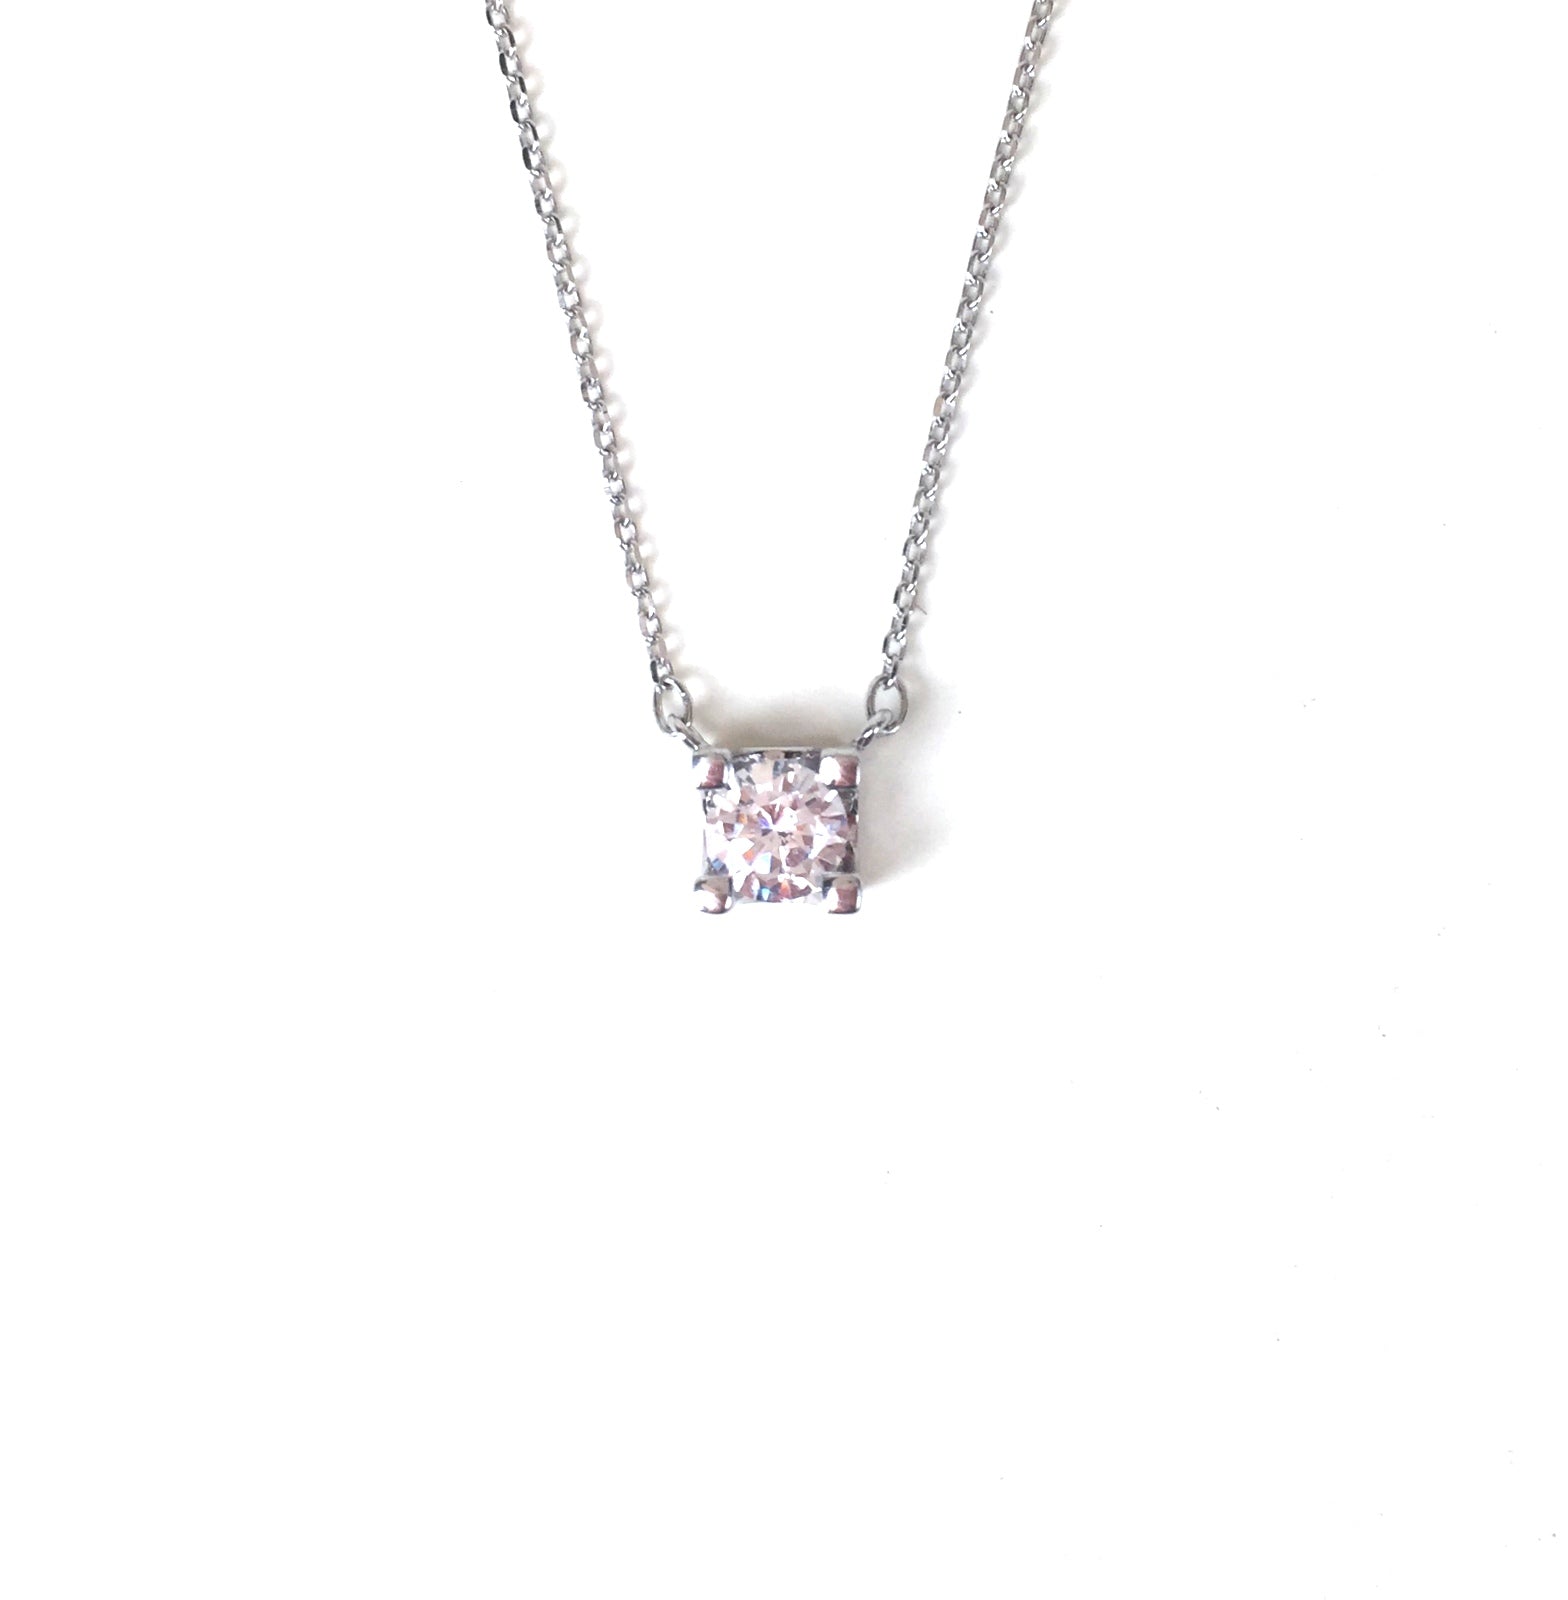 LITTLE SQUARE STERLING SILVER NECKLACE